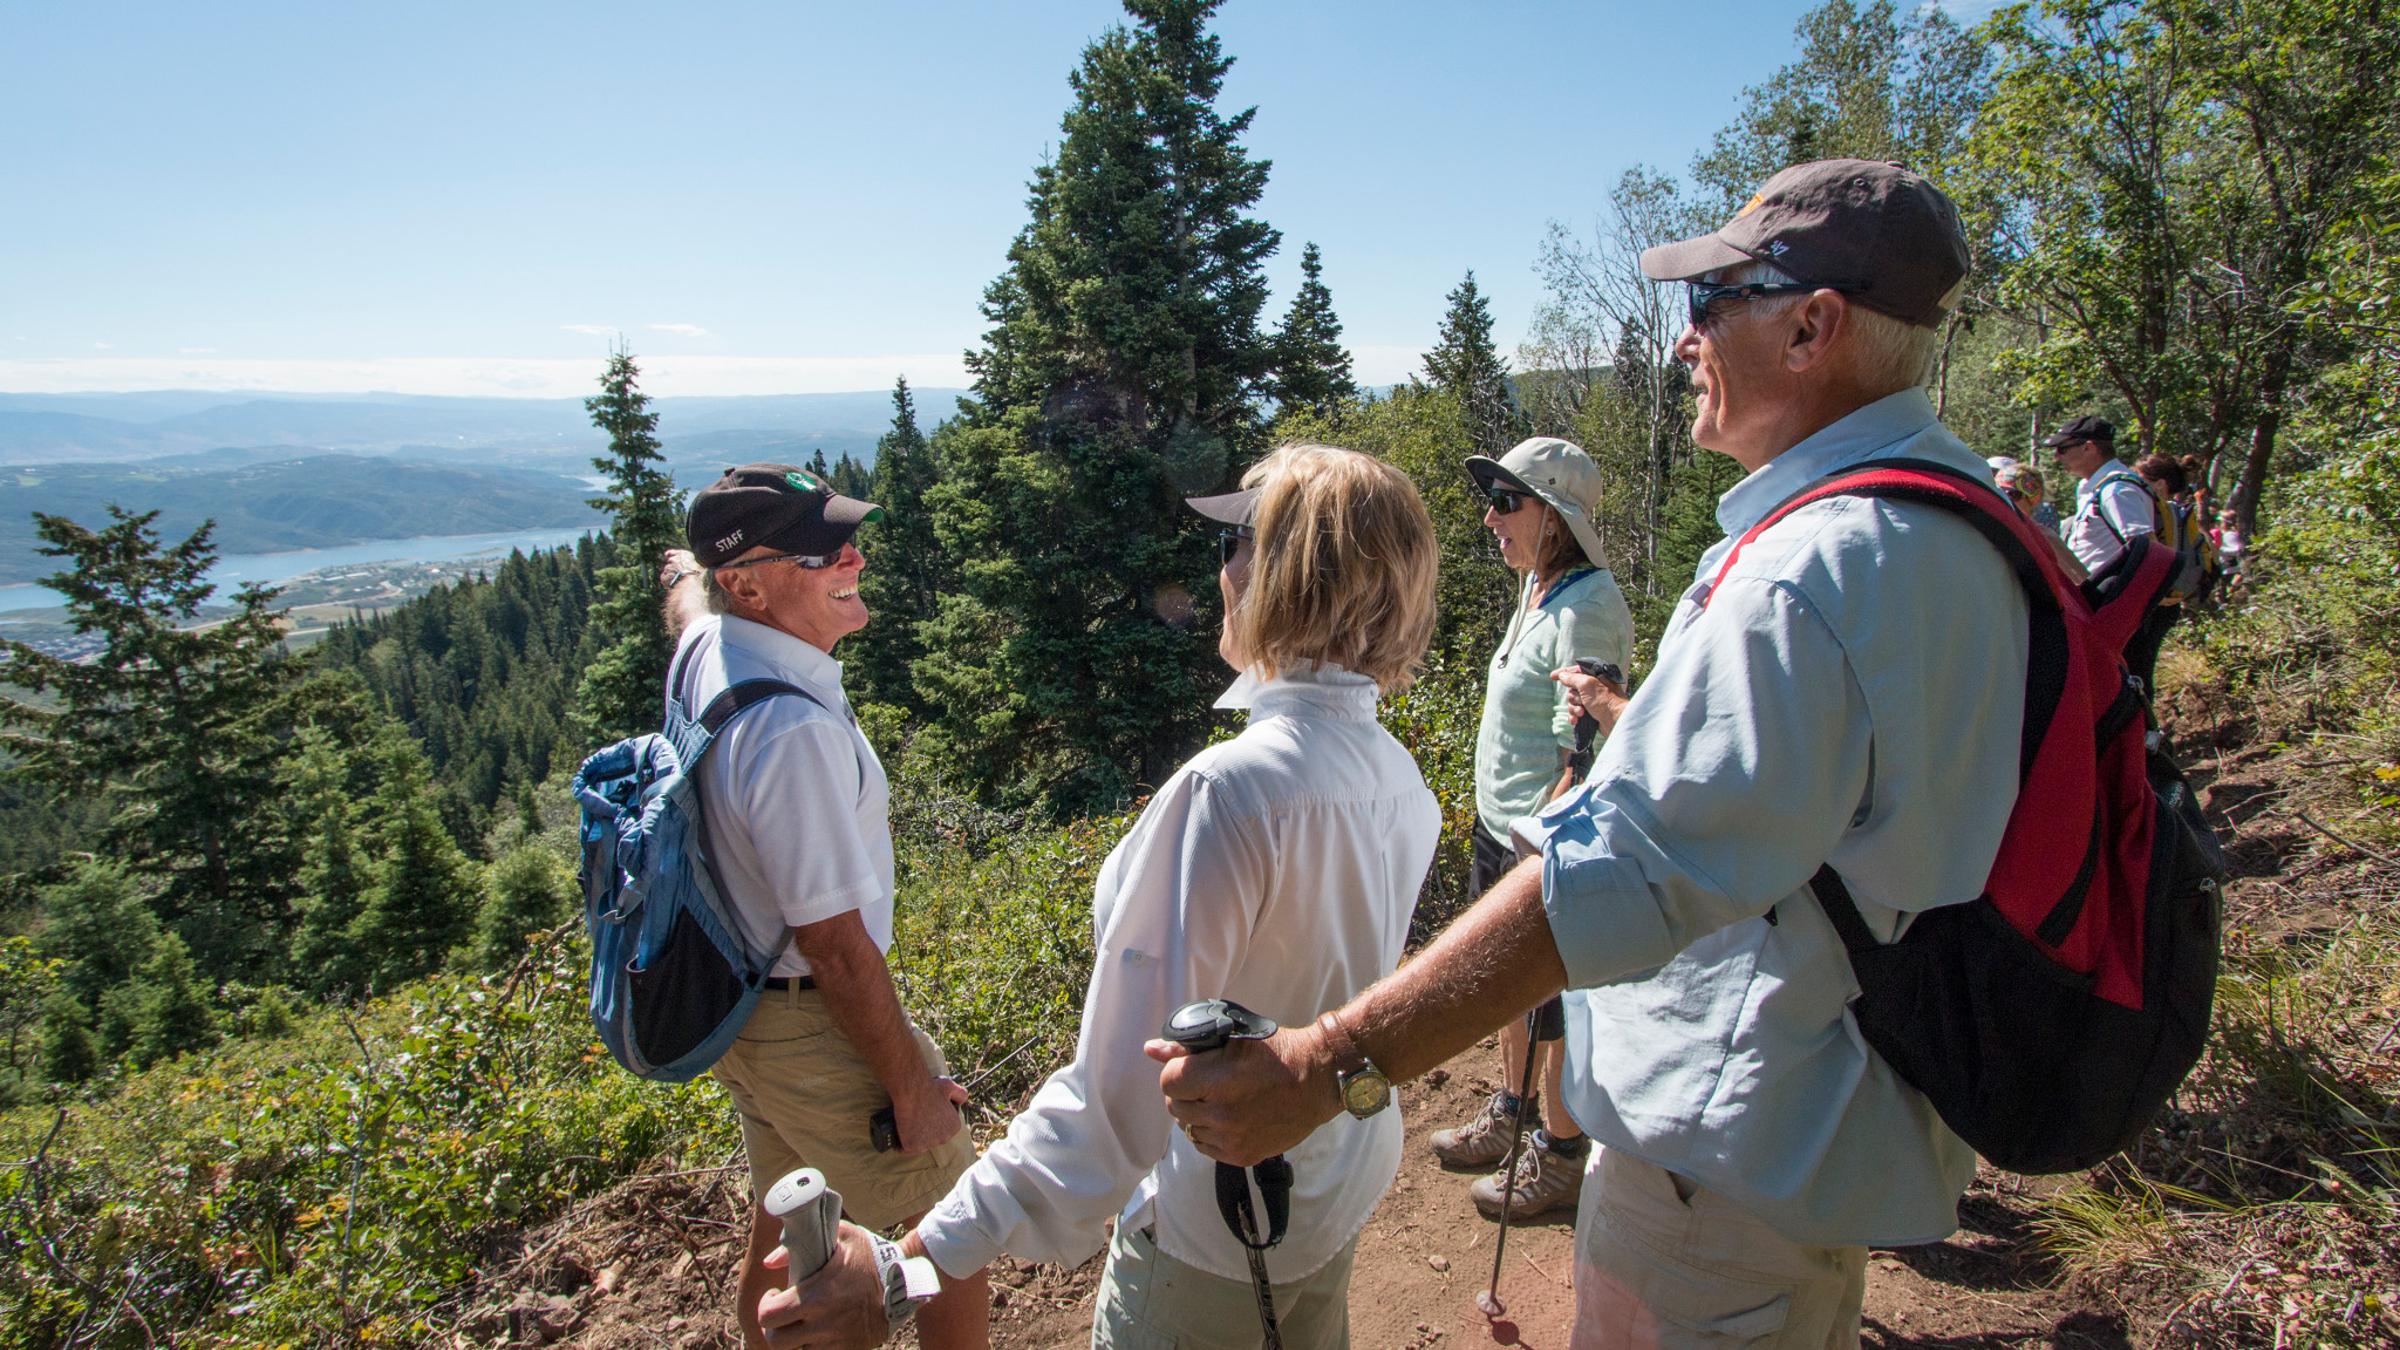 A hiking guide directing a group on a guided hike at Deer Valley Resort